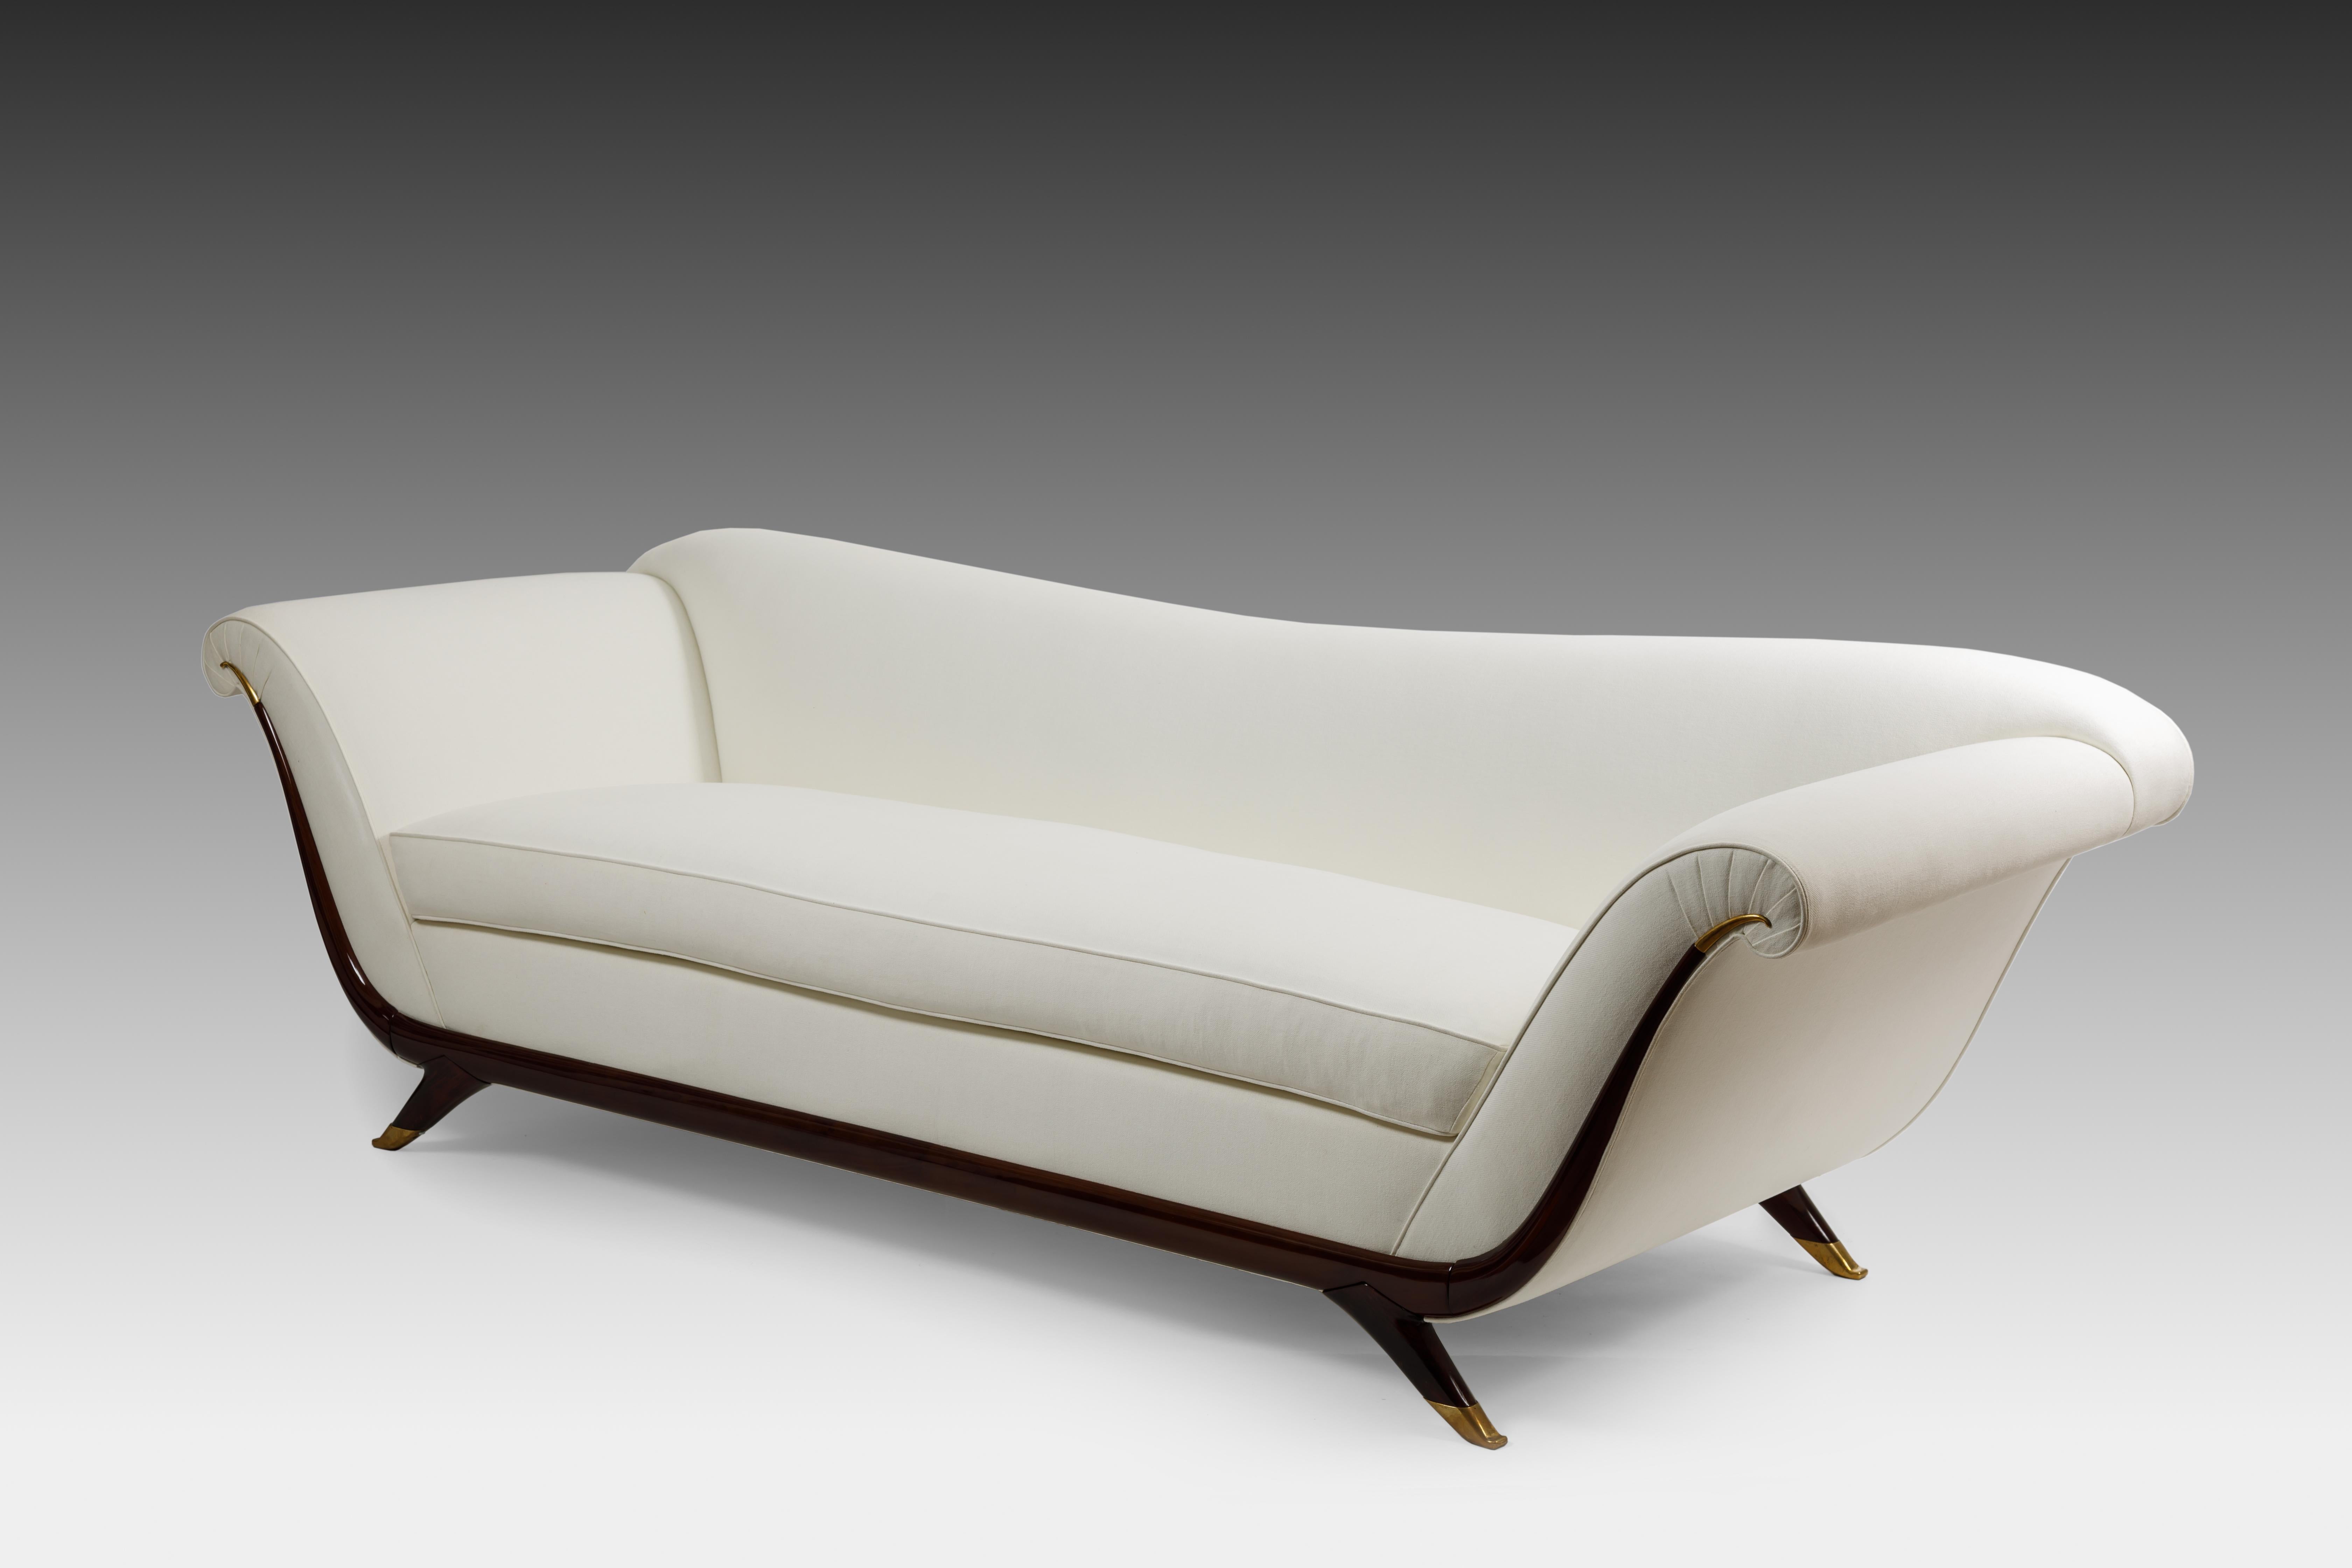 1940s Italian elegant long upholstered sofa with single seat cushion, lacquered wood and brass details, and splayed legs ending in brass sabots. This gondola-shaped sofa is contoured with sinuous lines in the scrolled arms, back and frame.
Fully